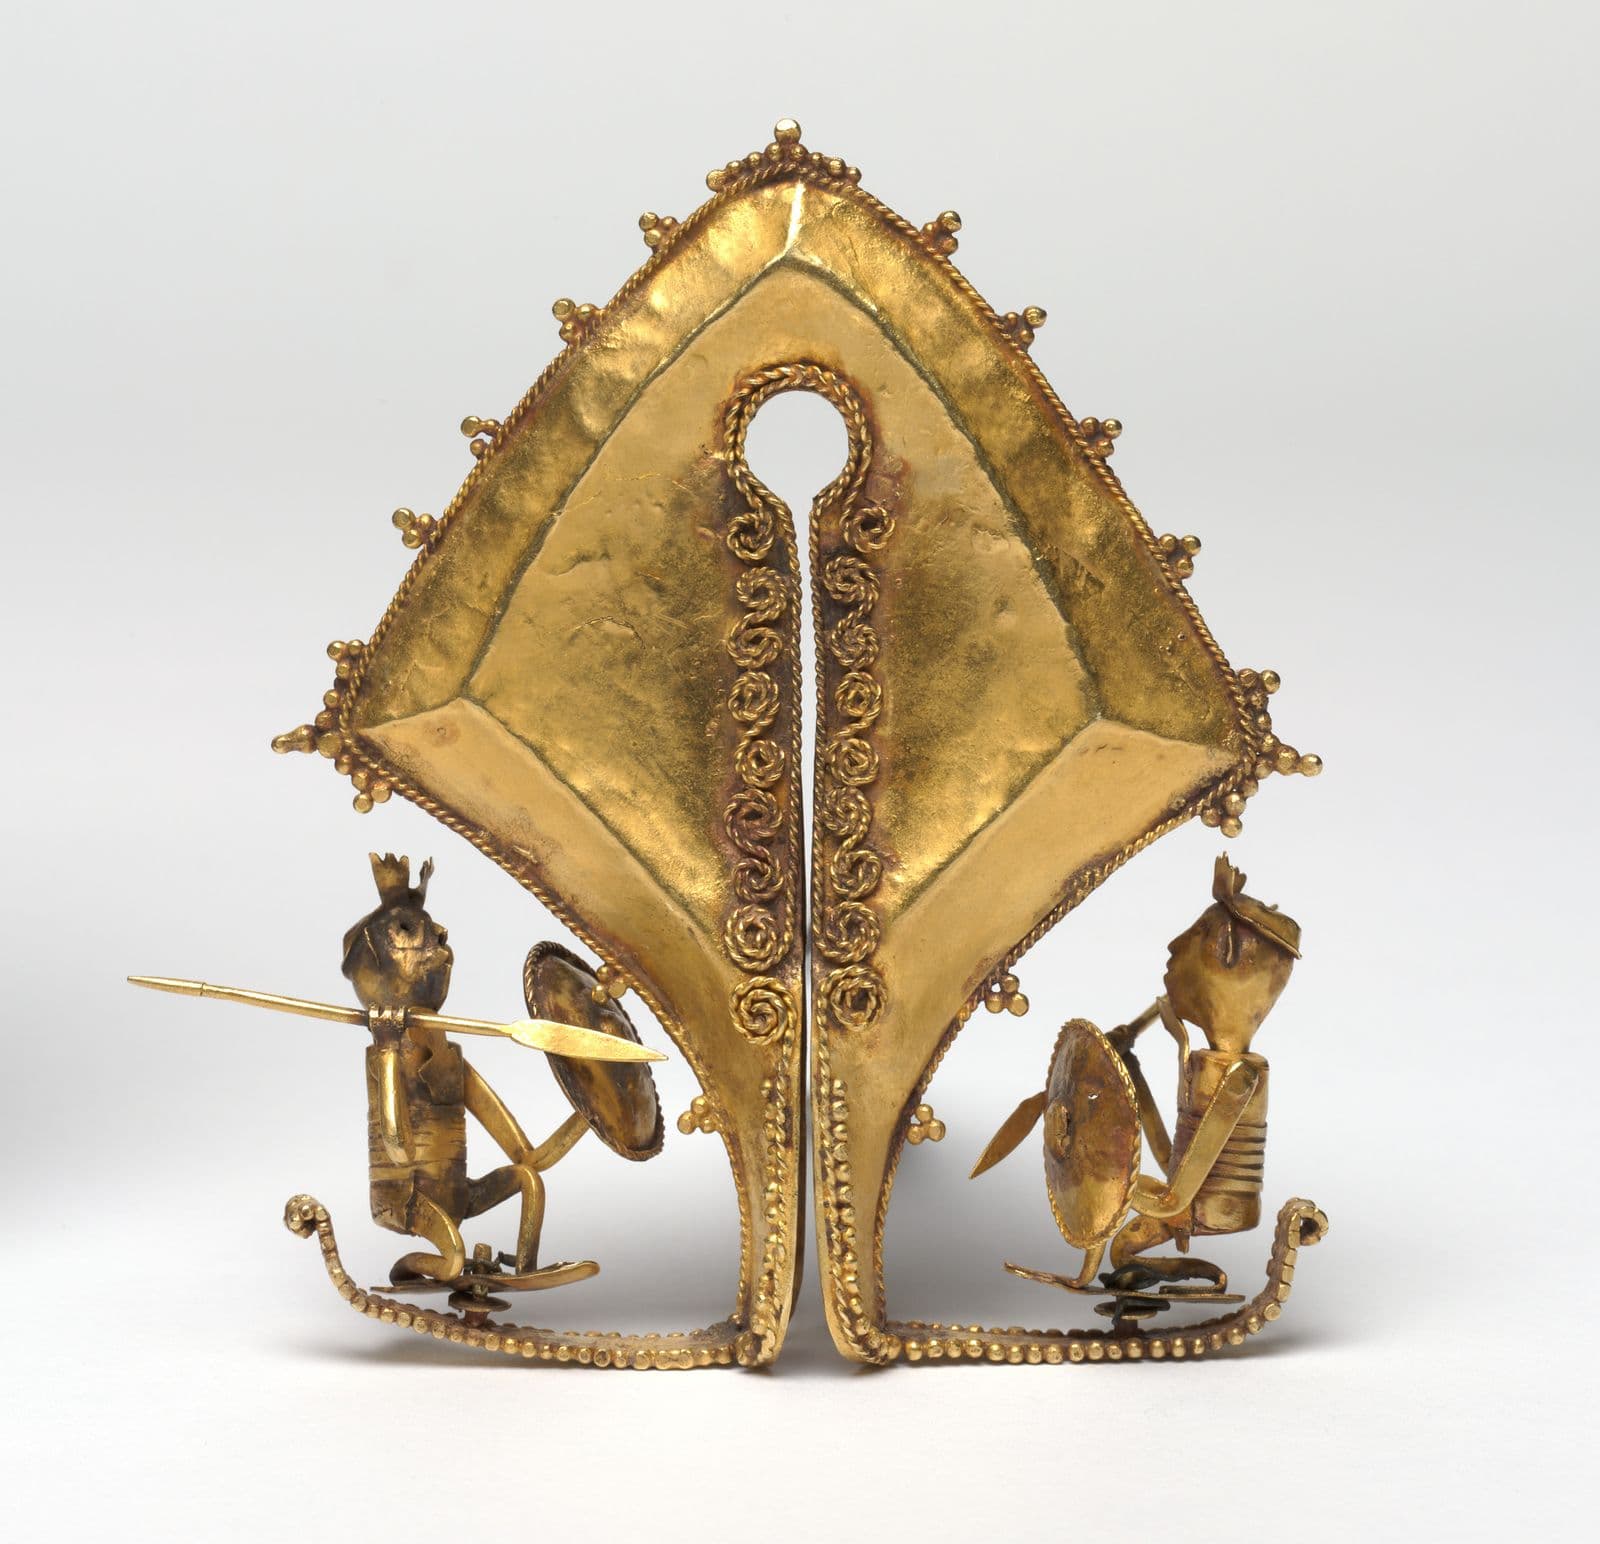 Gold ceremonial ear pendant, two warrior figures wielding spears and shields lie on either side of a diamond shaped central shape.